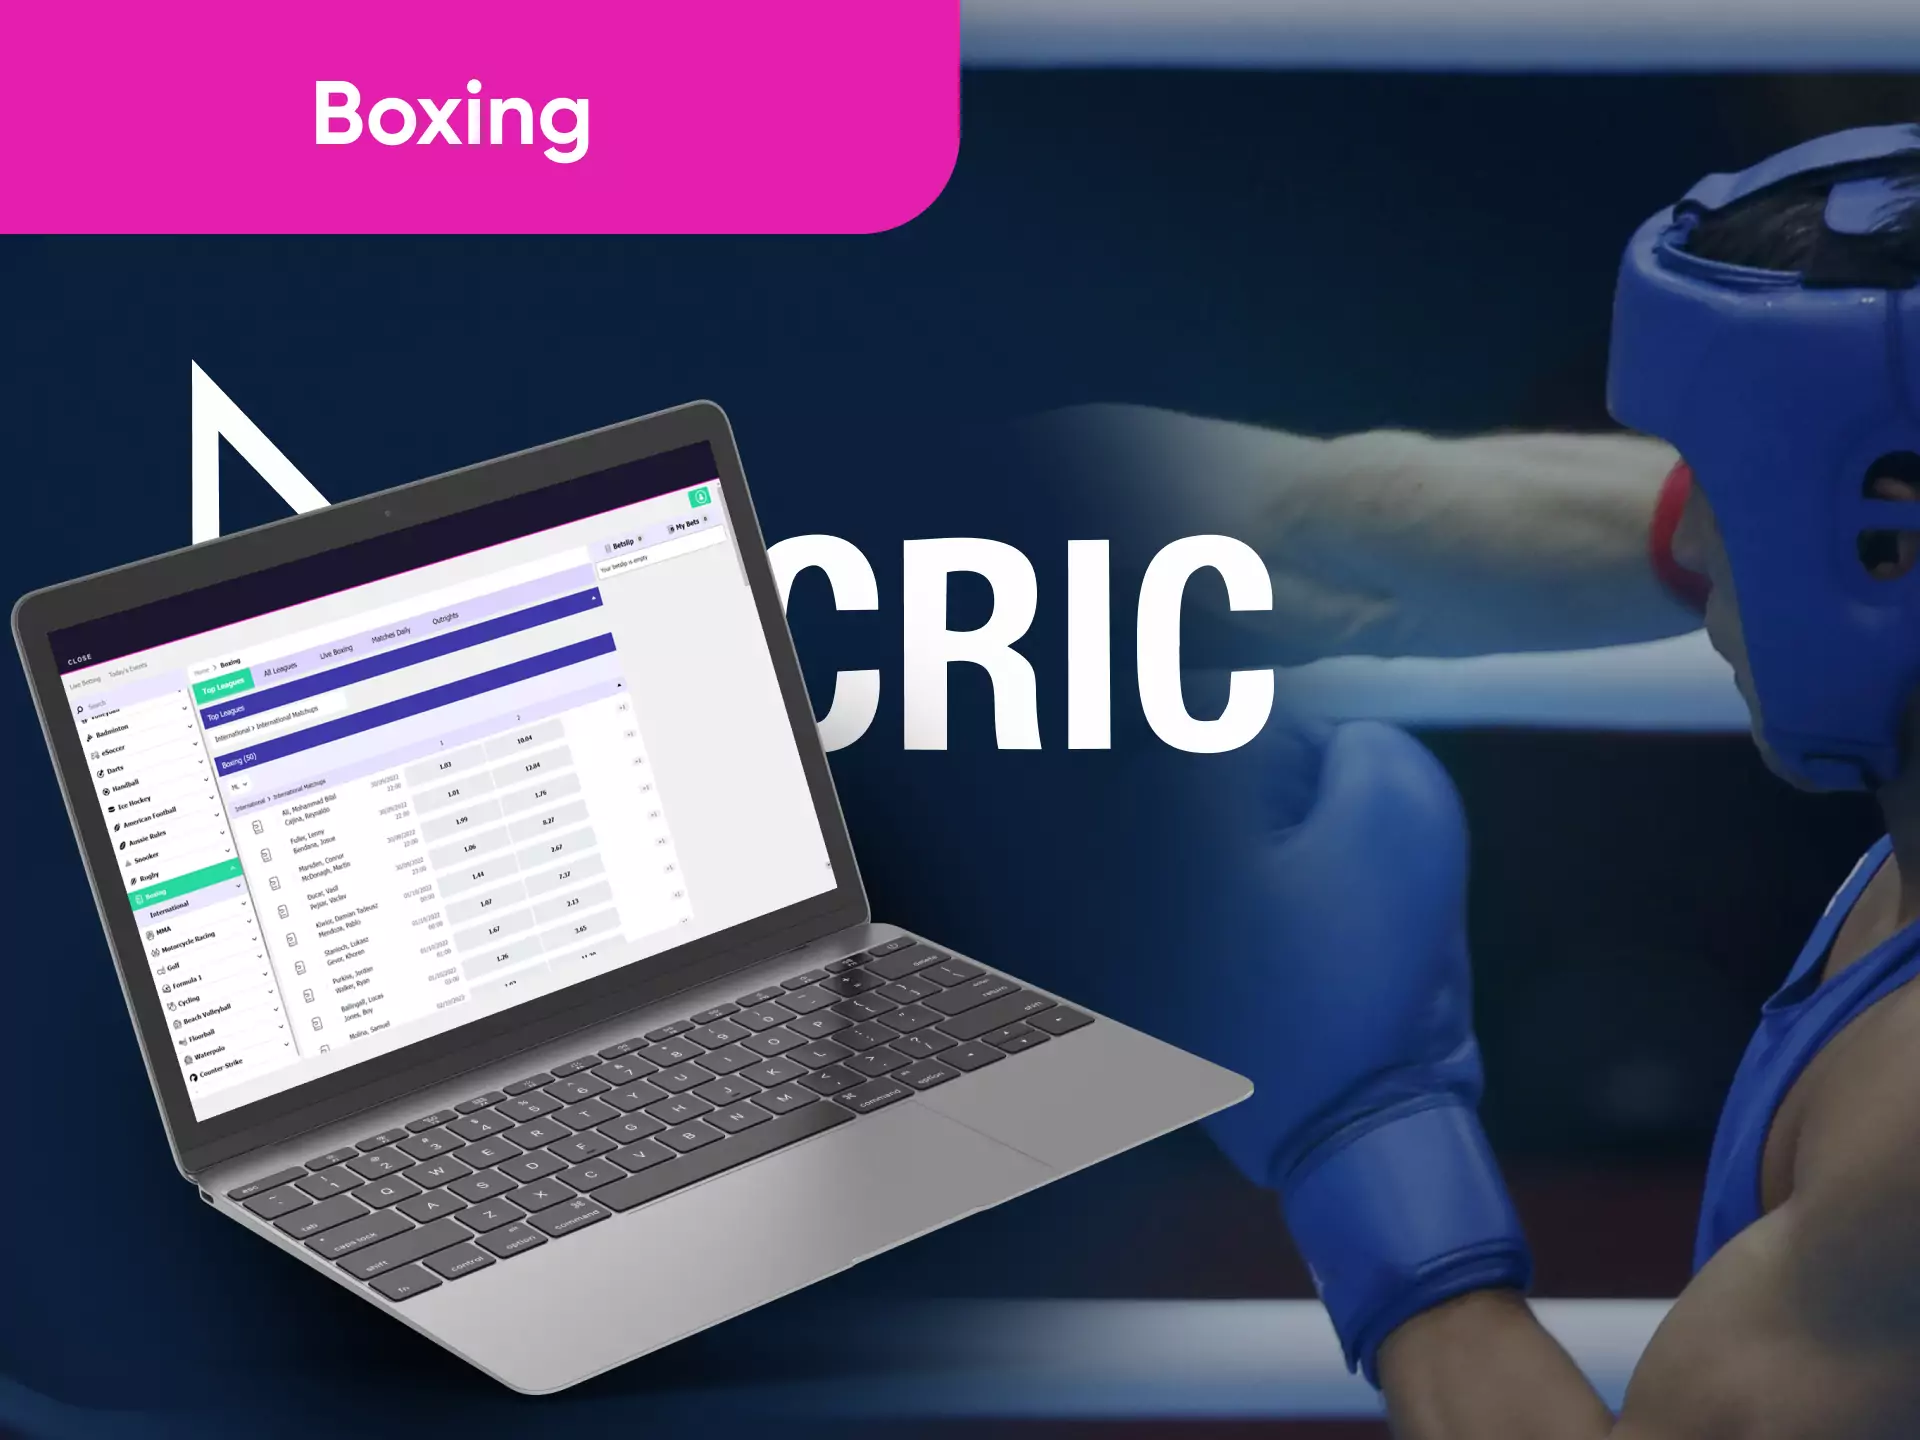 You can bet on boxing fights on the Becric website.